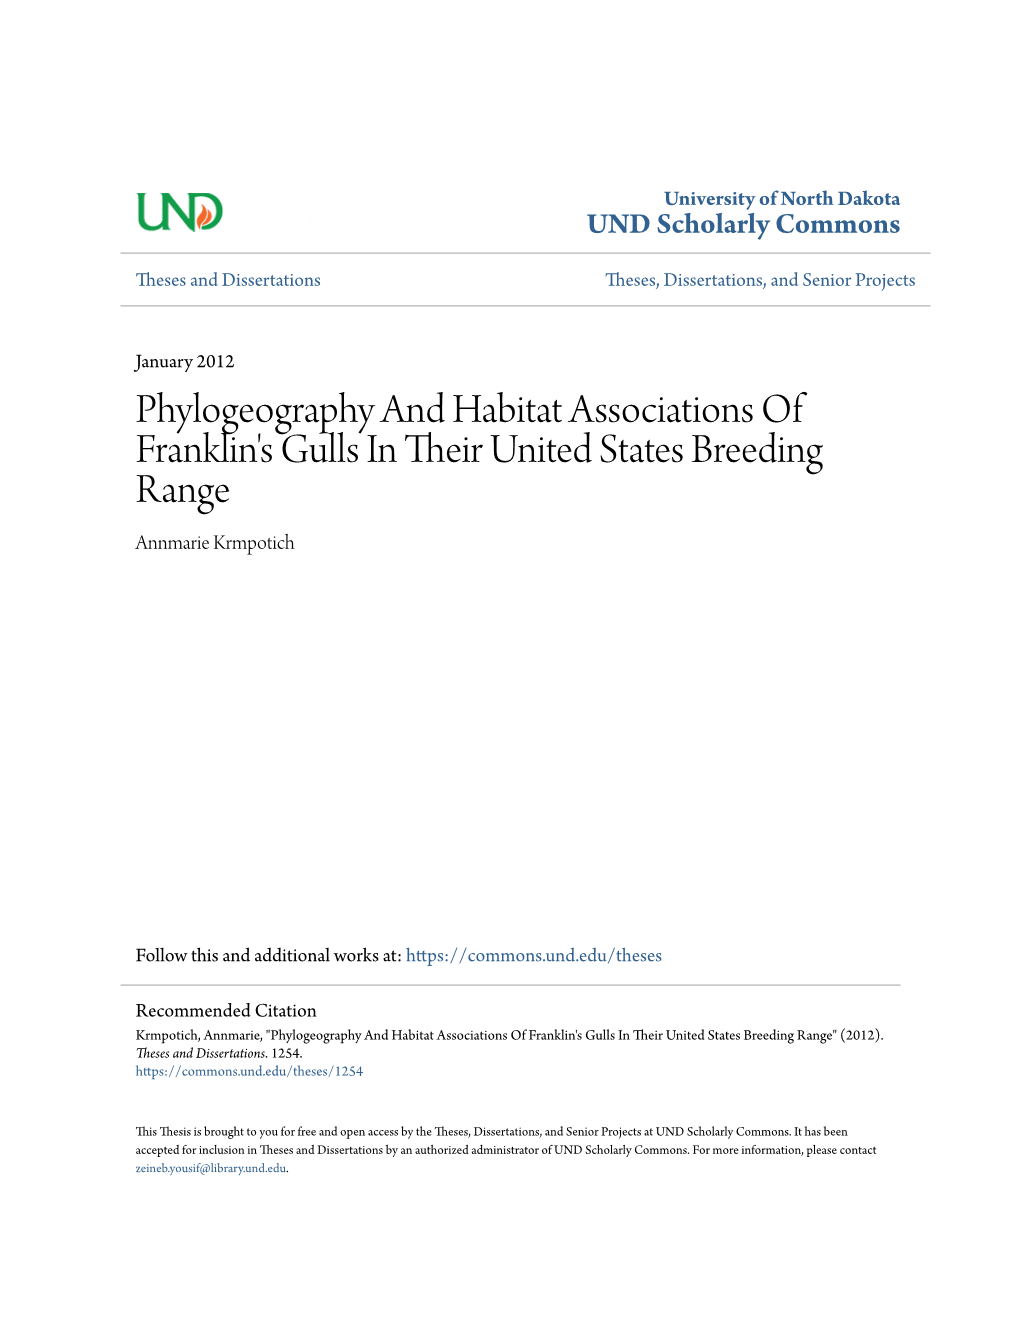 Phylogeography and Habitat Associations of Franklin's Gulls in Their Nitu Ed States Breeding Range Annmarie Krmpotich